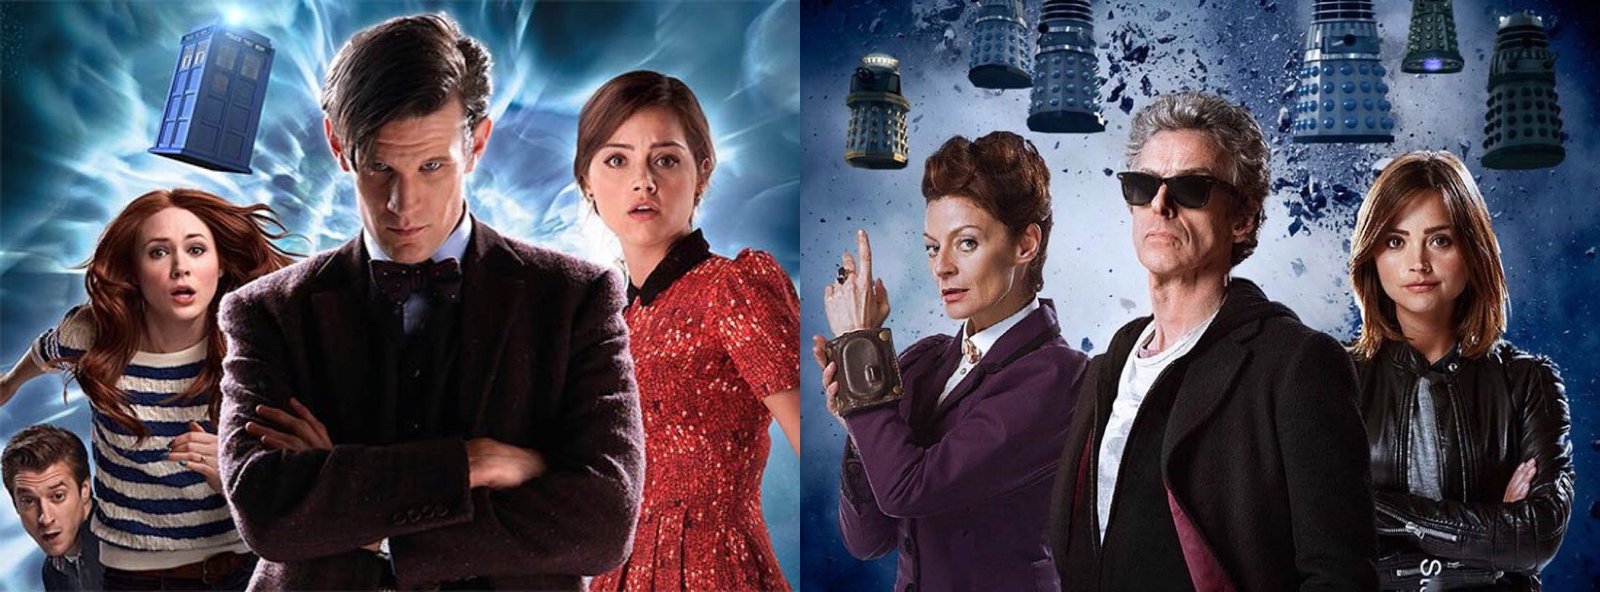 What If Doctor Who Series 7 Had Used the Series 9 Episodic Format?